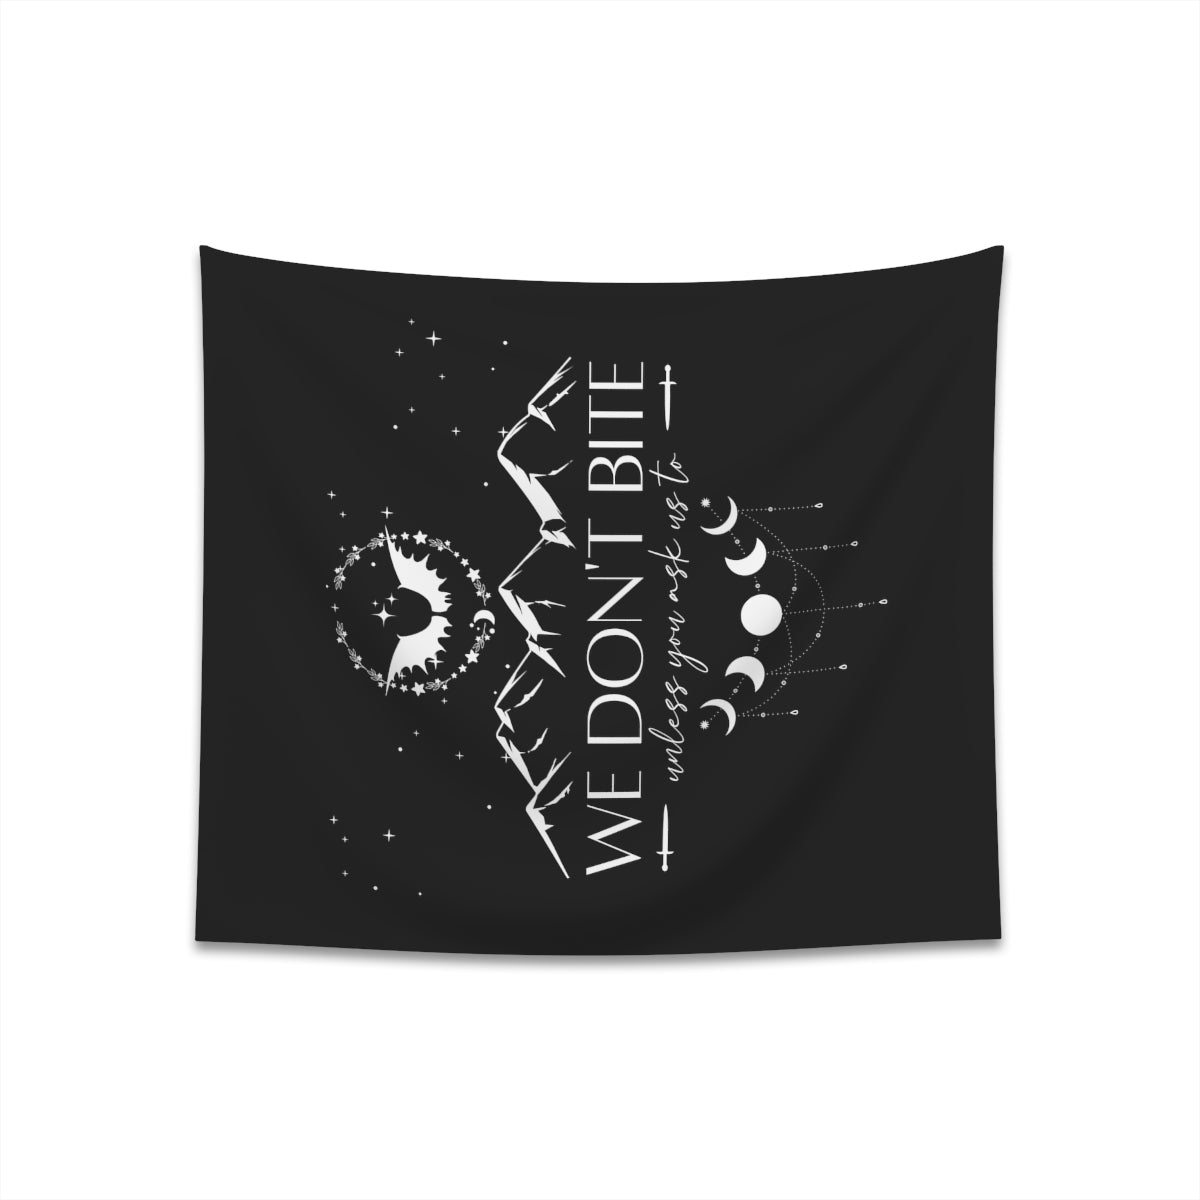 We Don't Bite ACOTAR Wall Tapestry